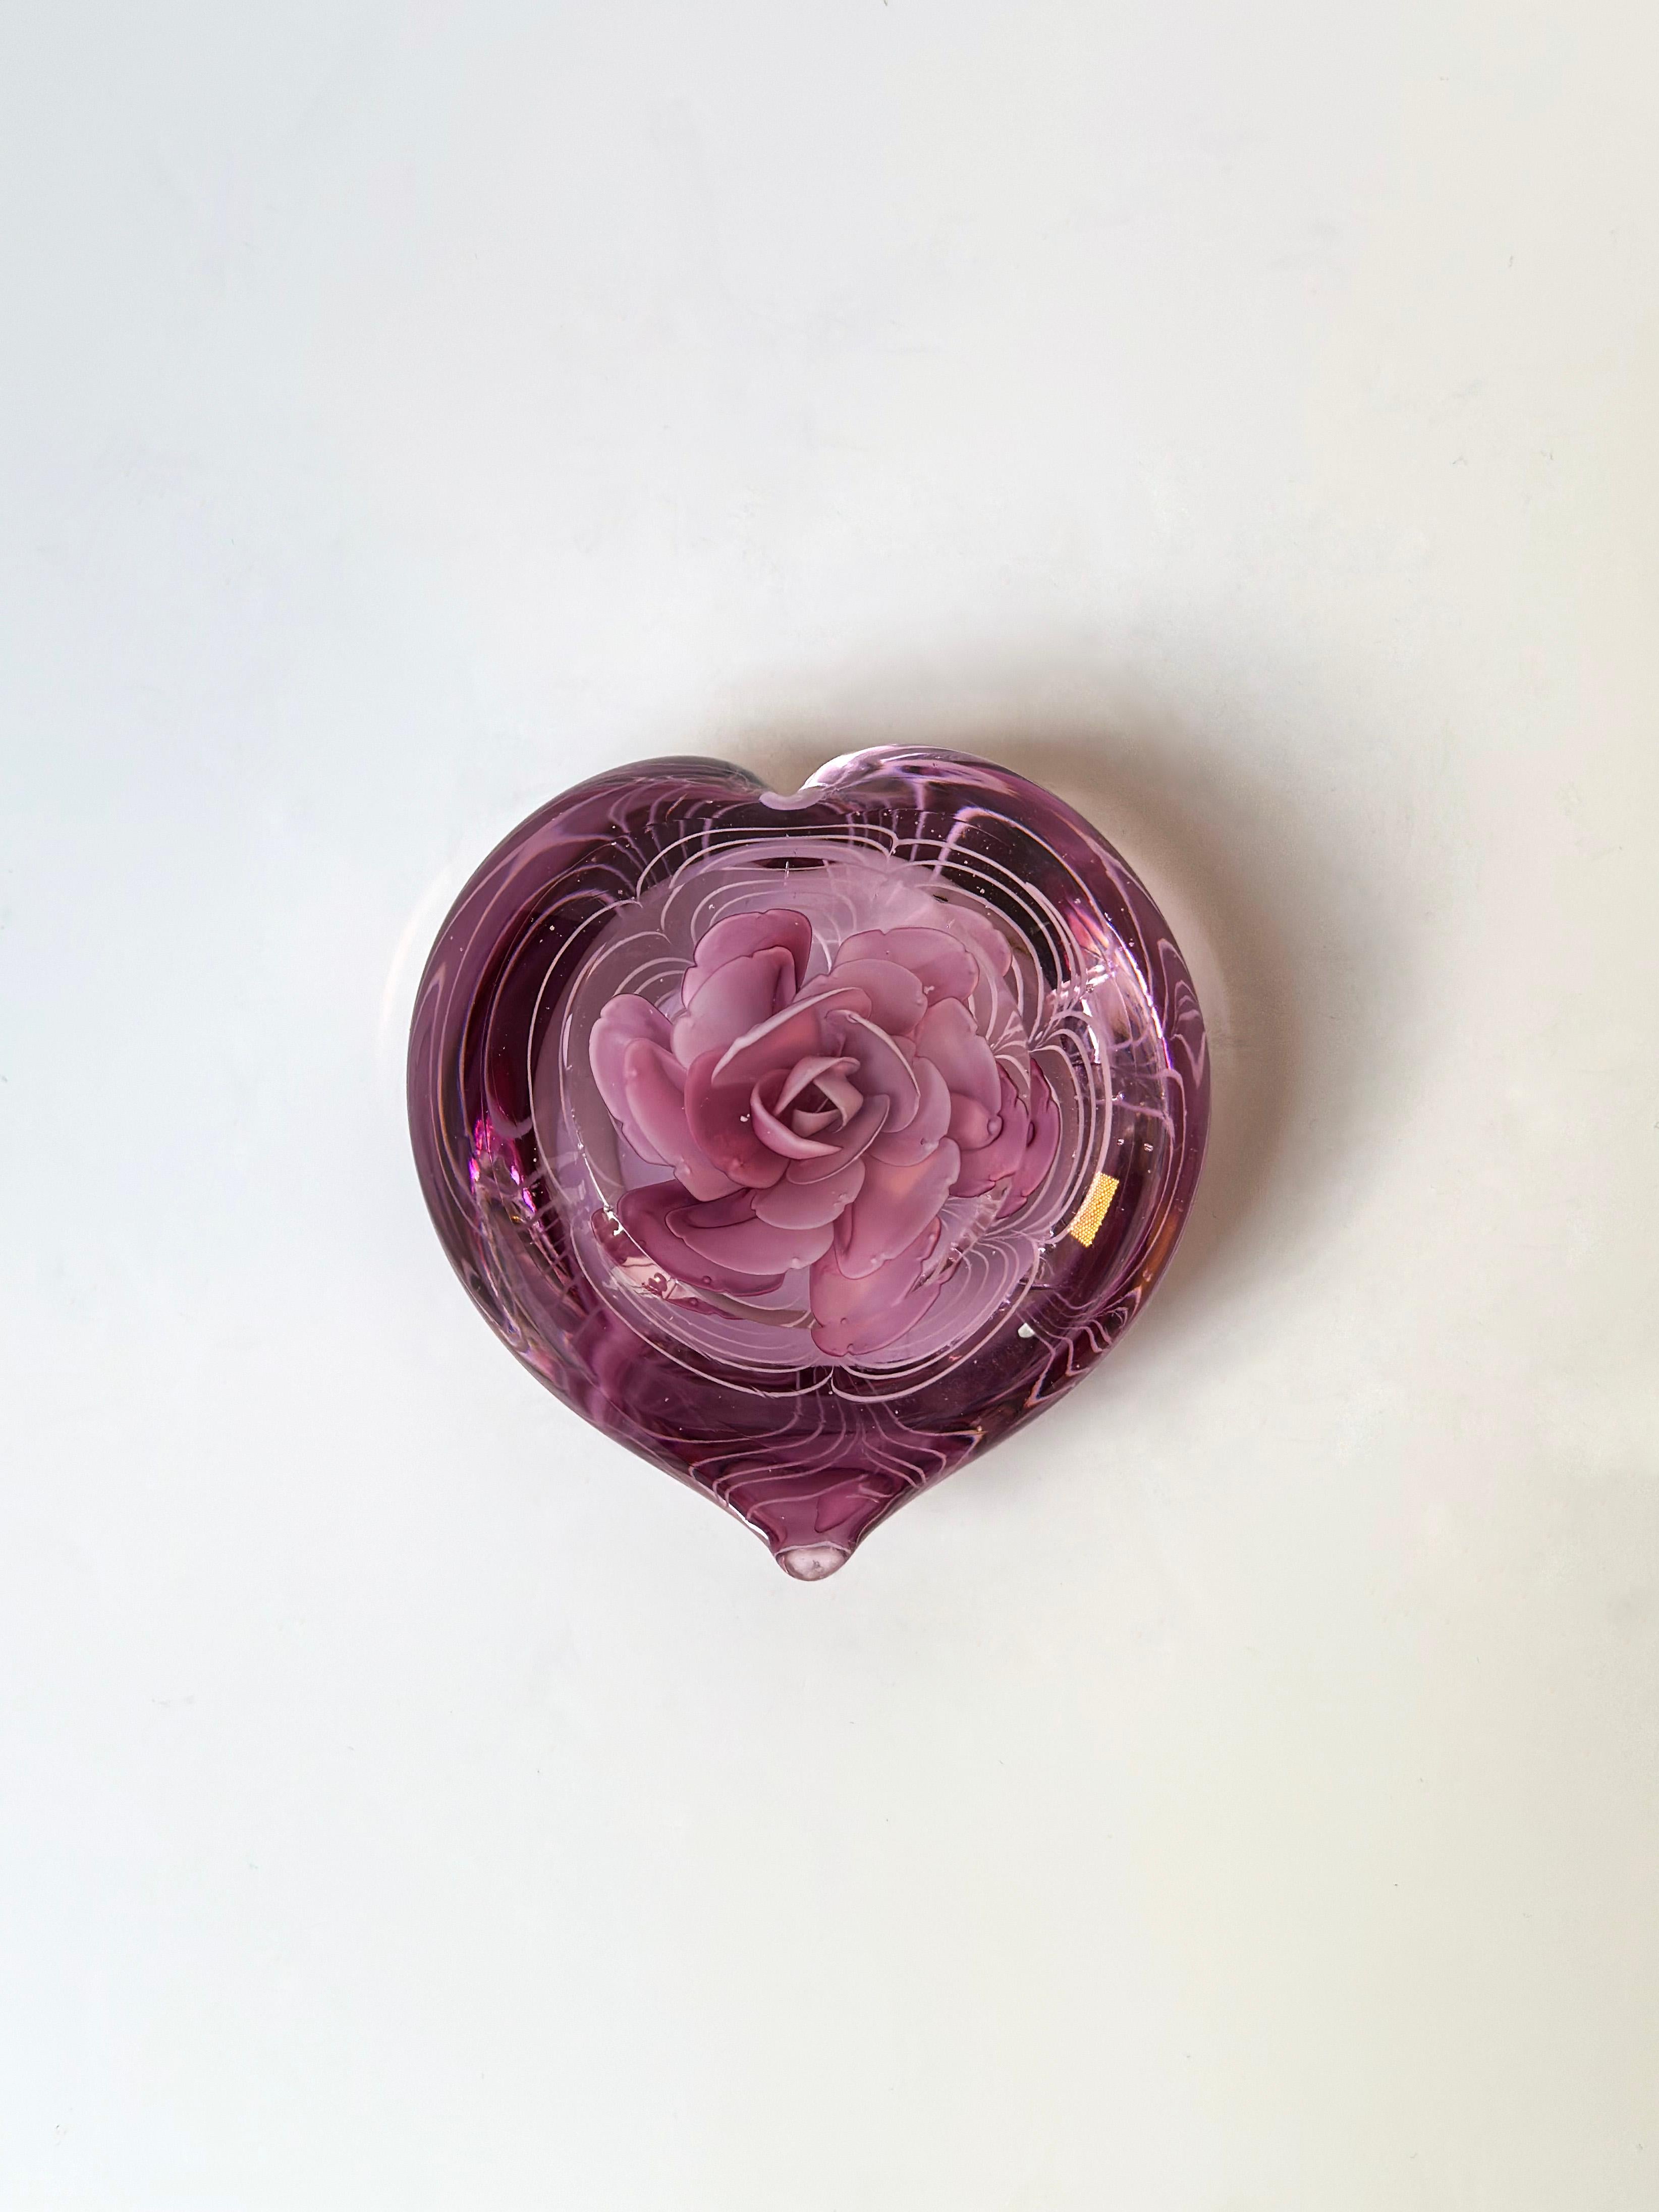 Art Glass Vintage Heart Shaped Pink Glass Paperweight with Rose Petal Centre